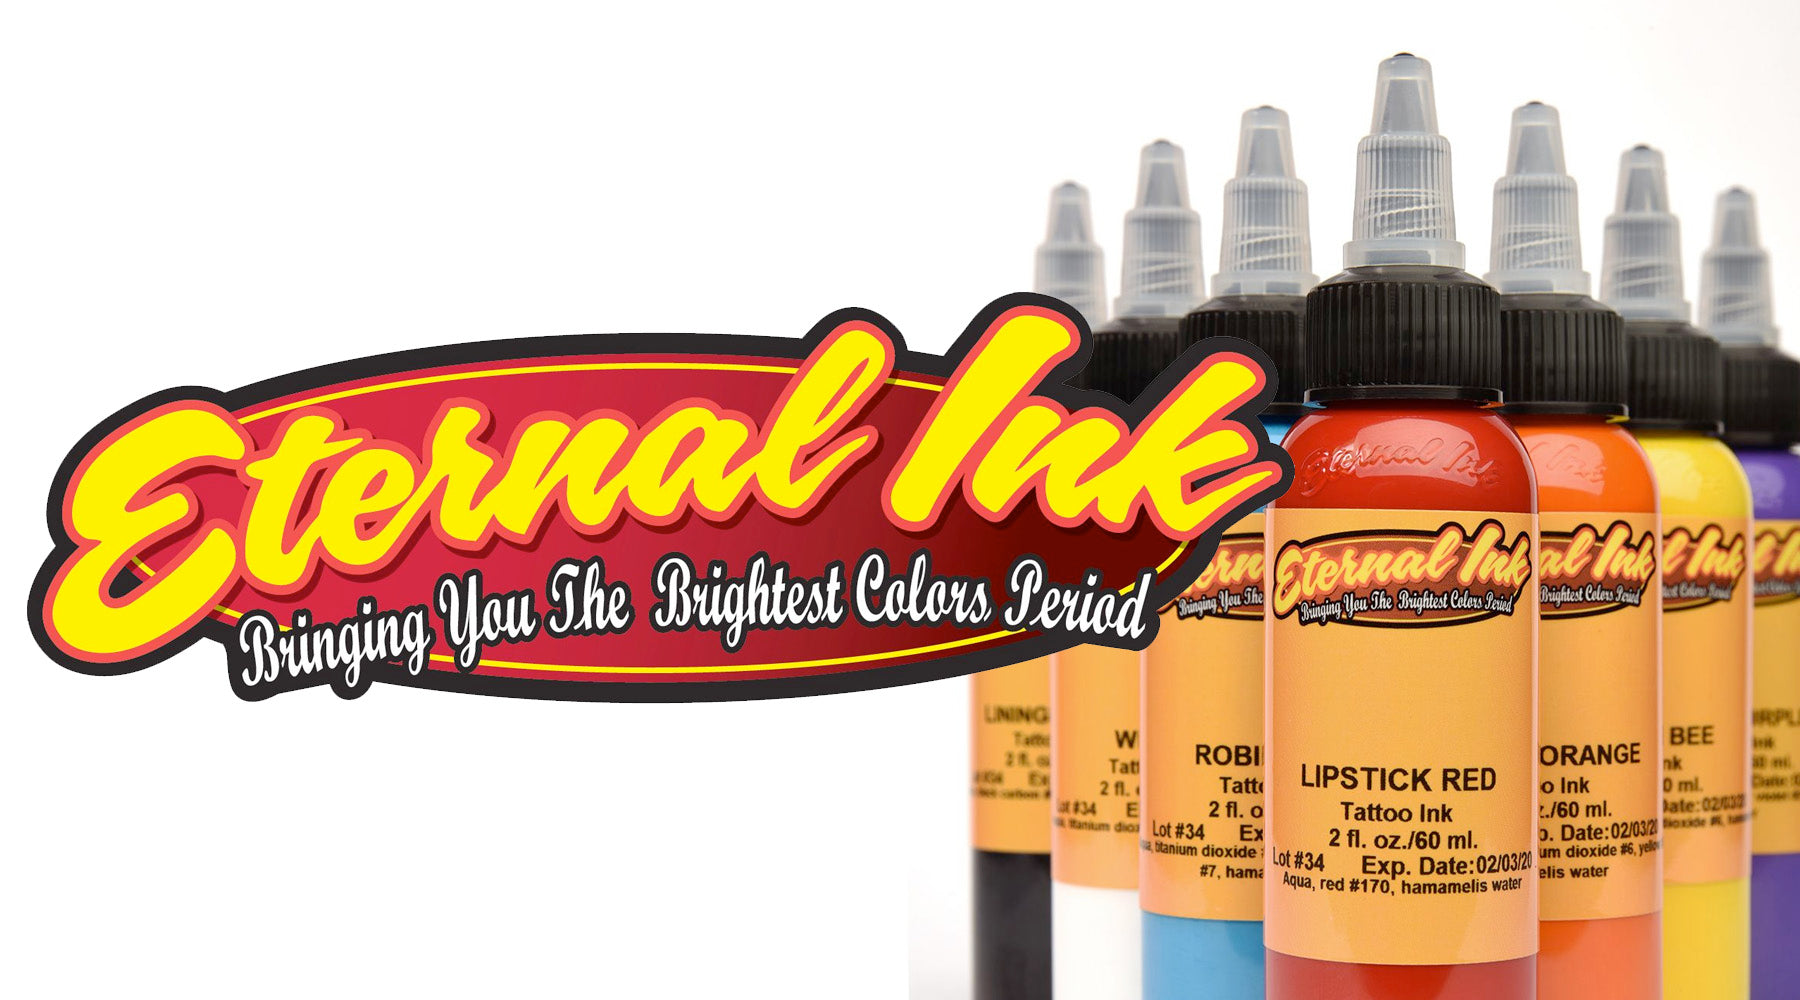 Higher Level Tattoo Supply - High Quality Supplies for Tattoo Artists | Eternal Ink - Bringing you the Brightest Colors Period